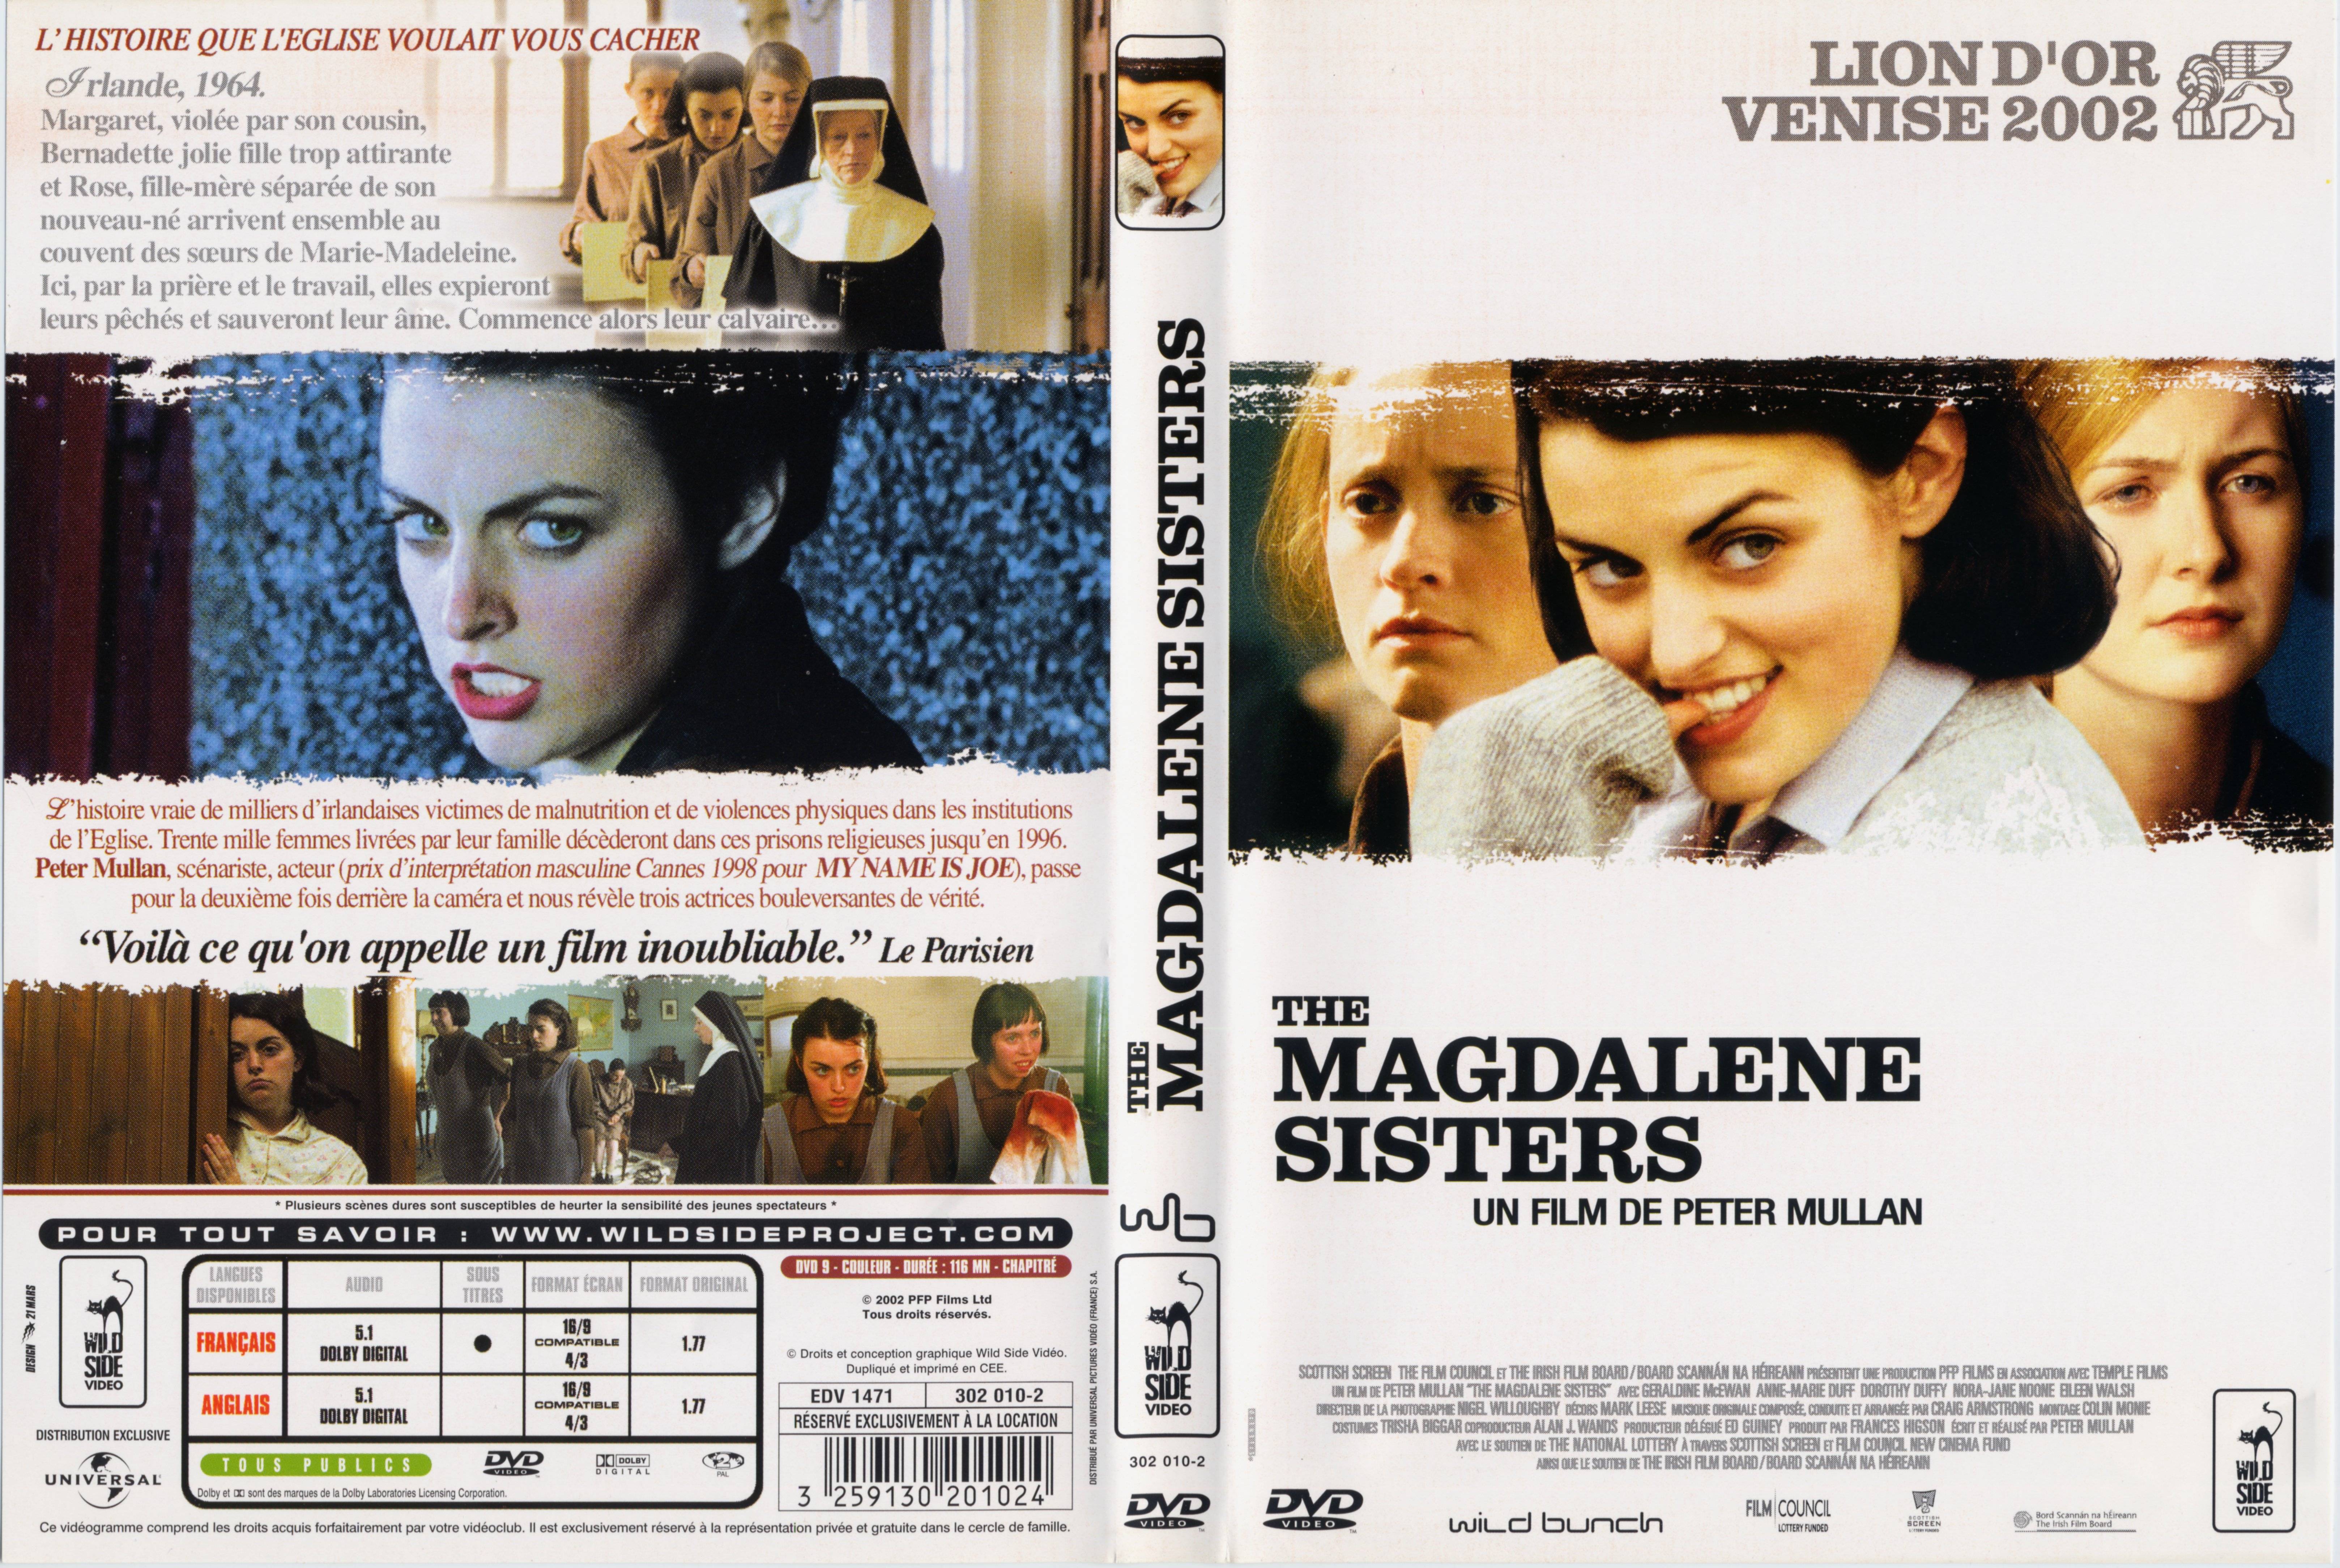 Jaquette DVD The magdalene sisters